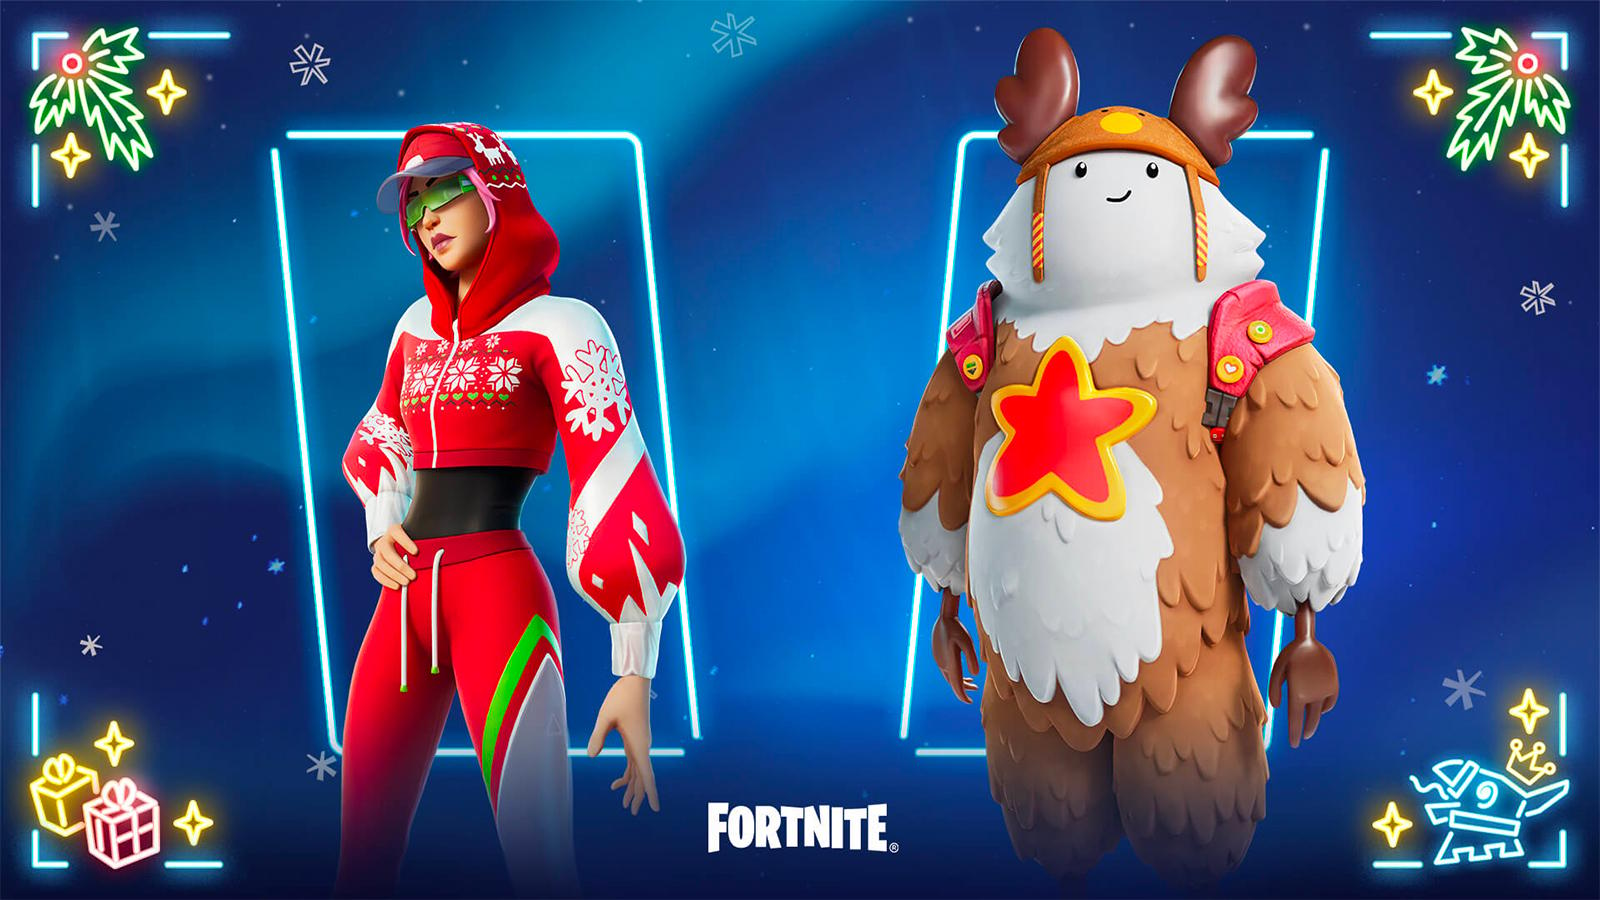 The free skins in Winterfest 2022 presents